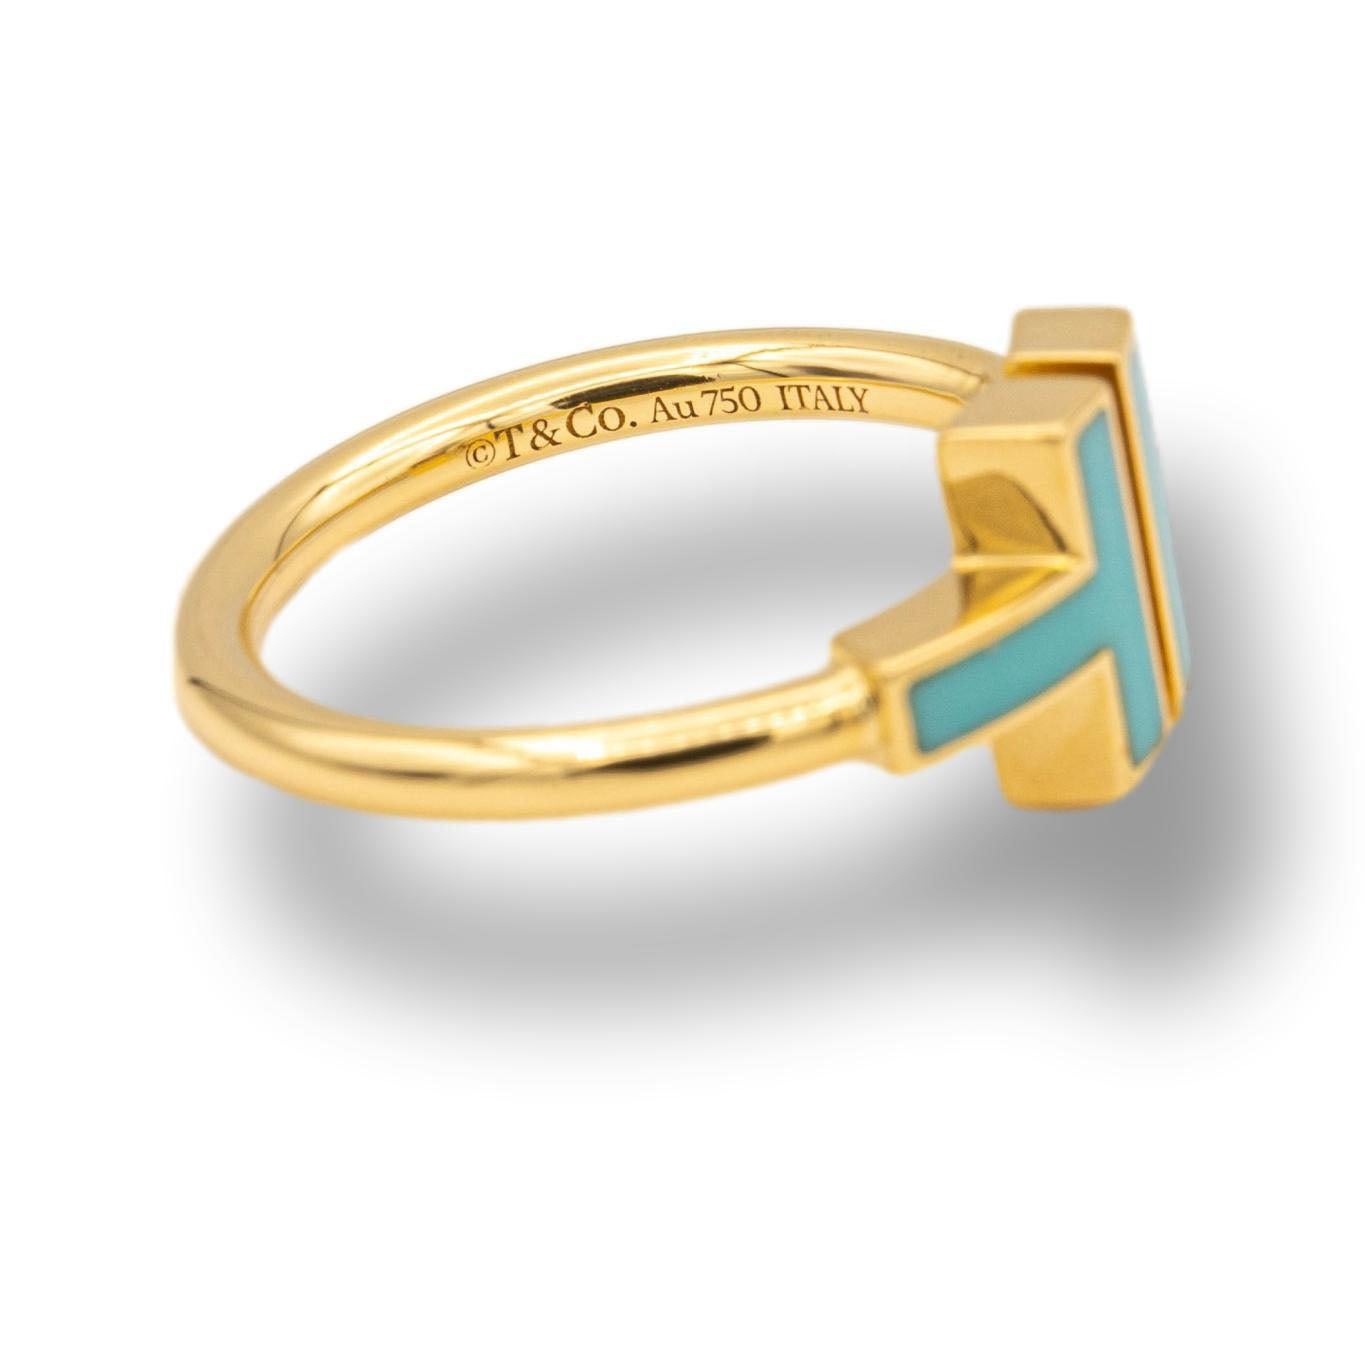 tiffany t ring turquoise